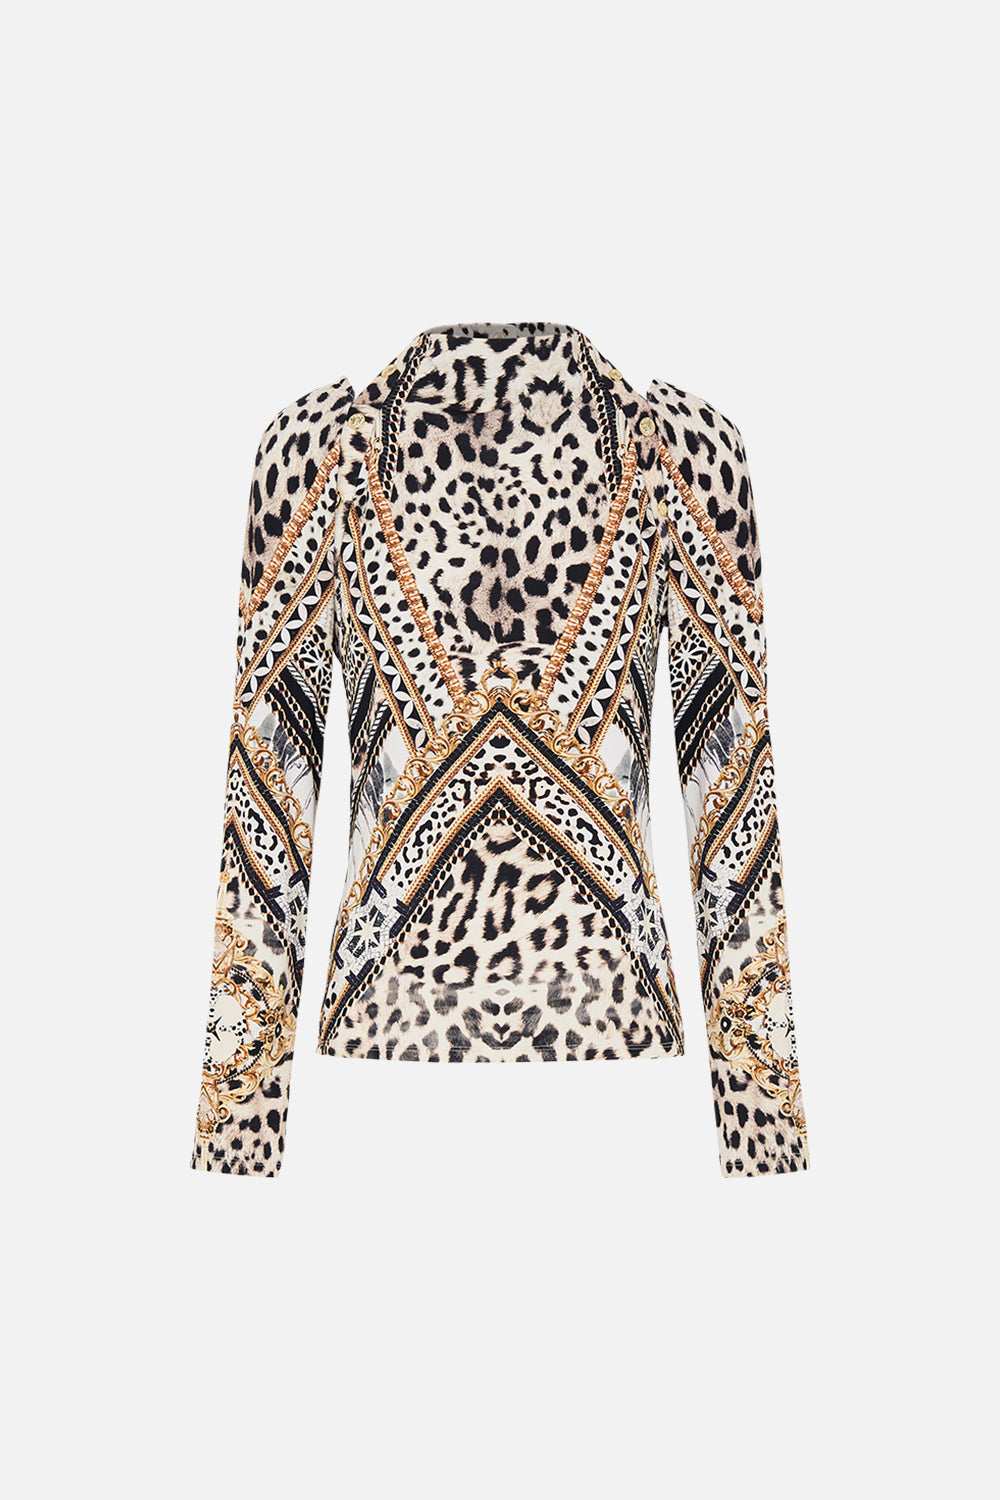 Product view of  CAMILLA animal print top in Mosaic Muse print